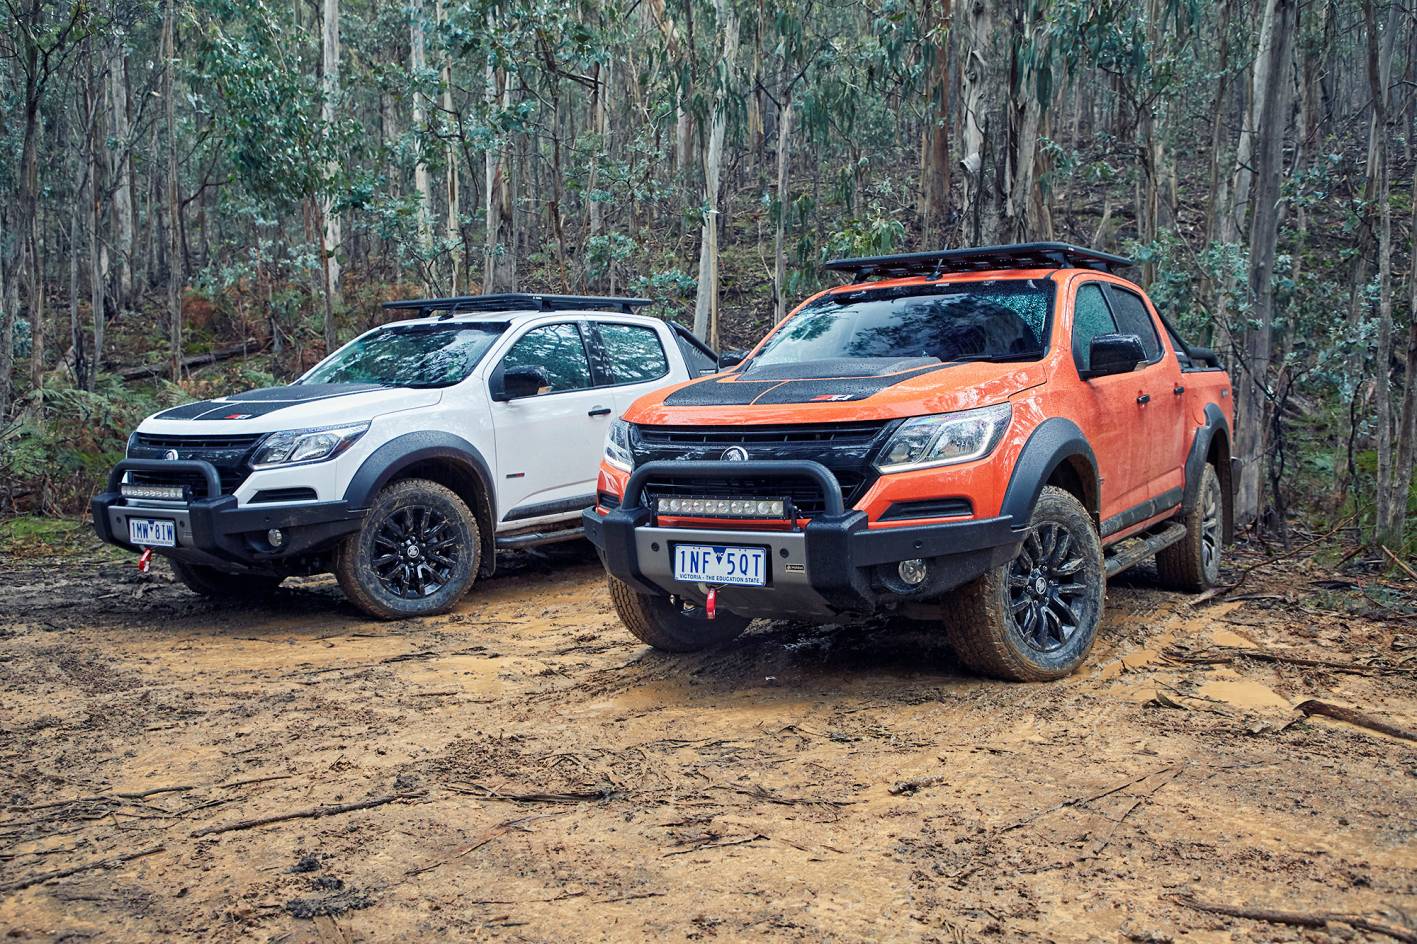 Holden Colorado Z71 Xtreme limited edition announced